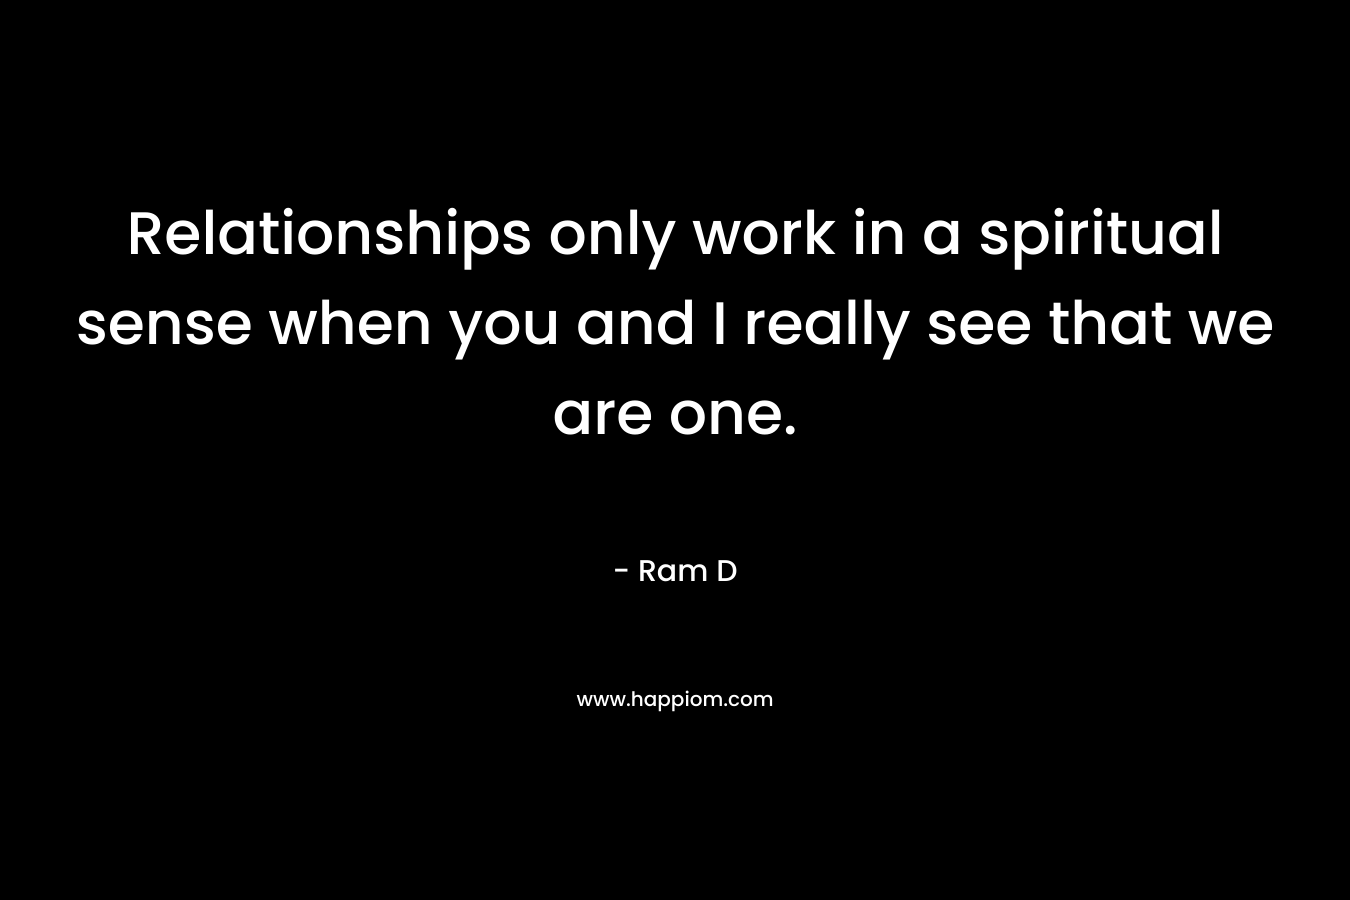 Relationships only work in a spiritual sense when you and I really see that we are one. – Ram D